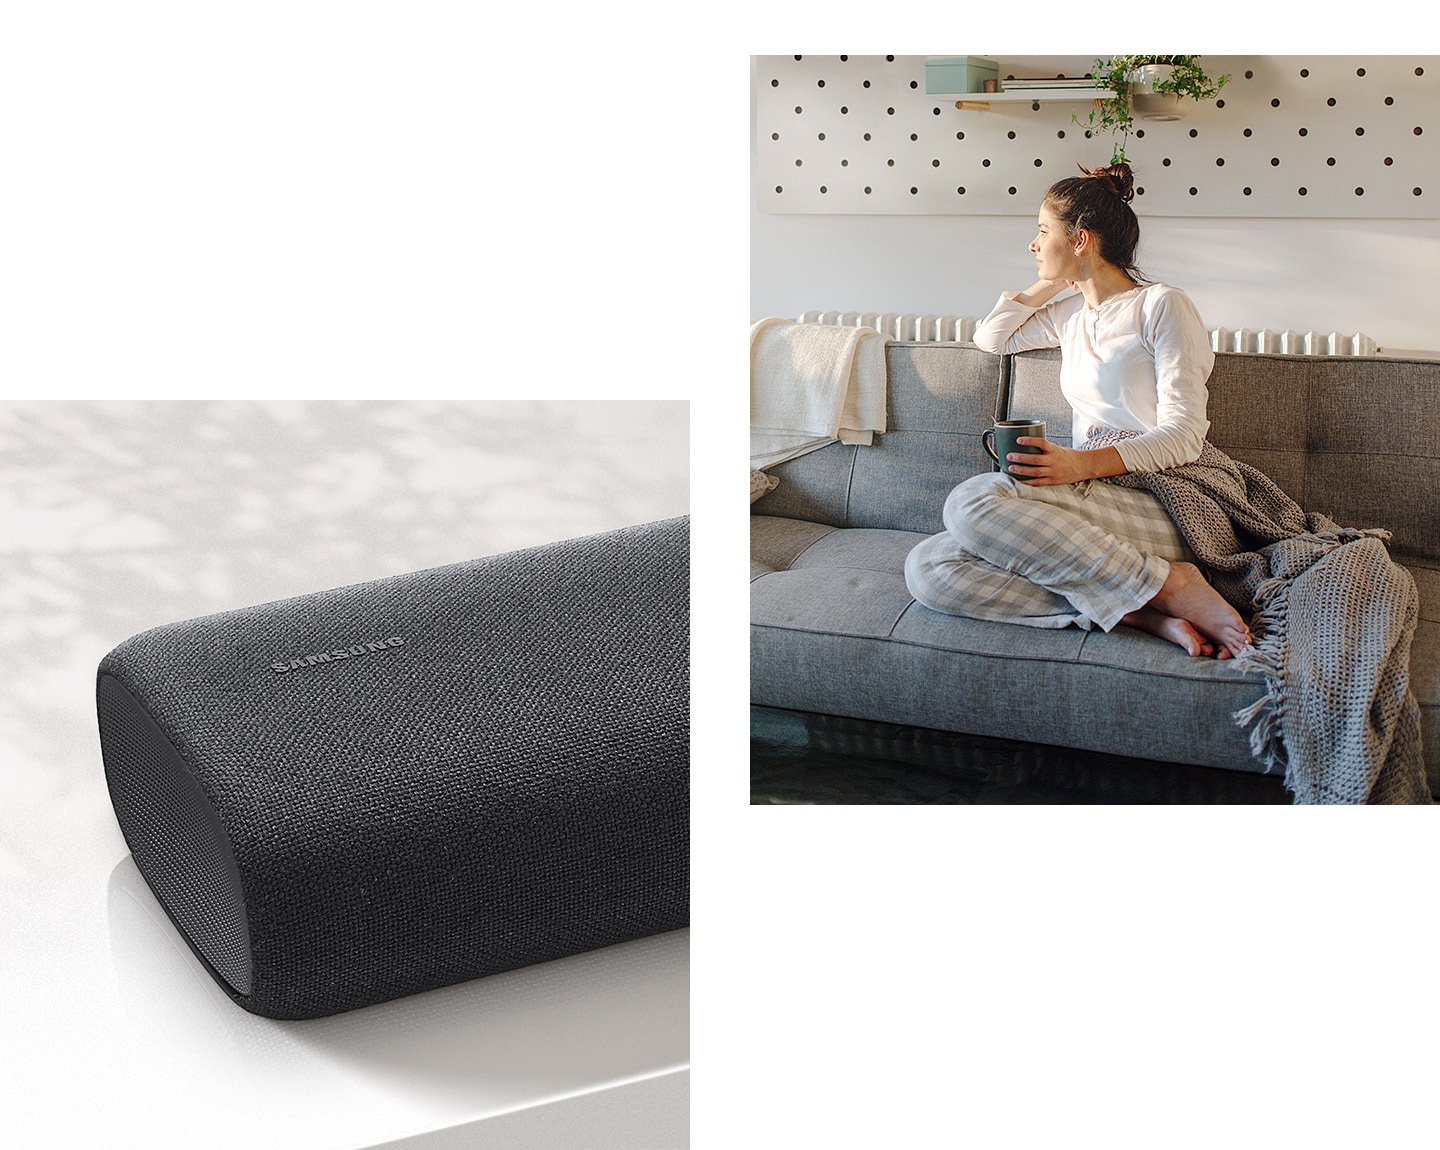 A combination of product and lifestyle images demonstrates how the S60A soundbar All-in-one design aesthetics blend into any room environment.